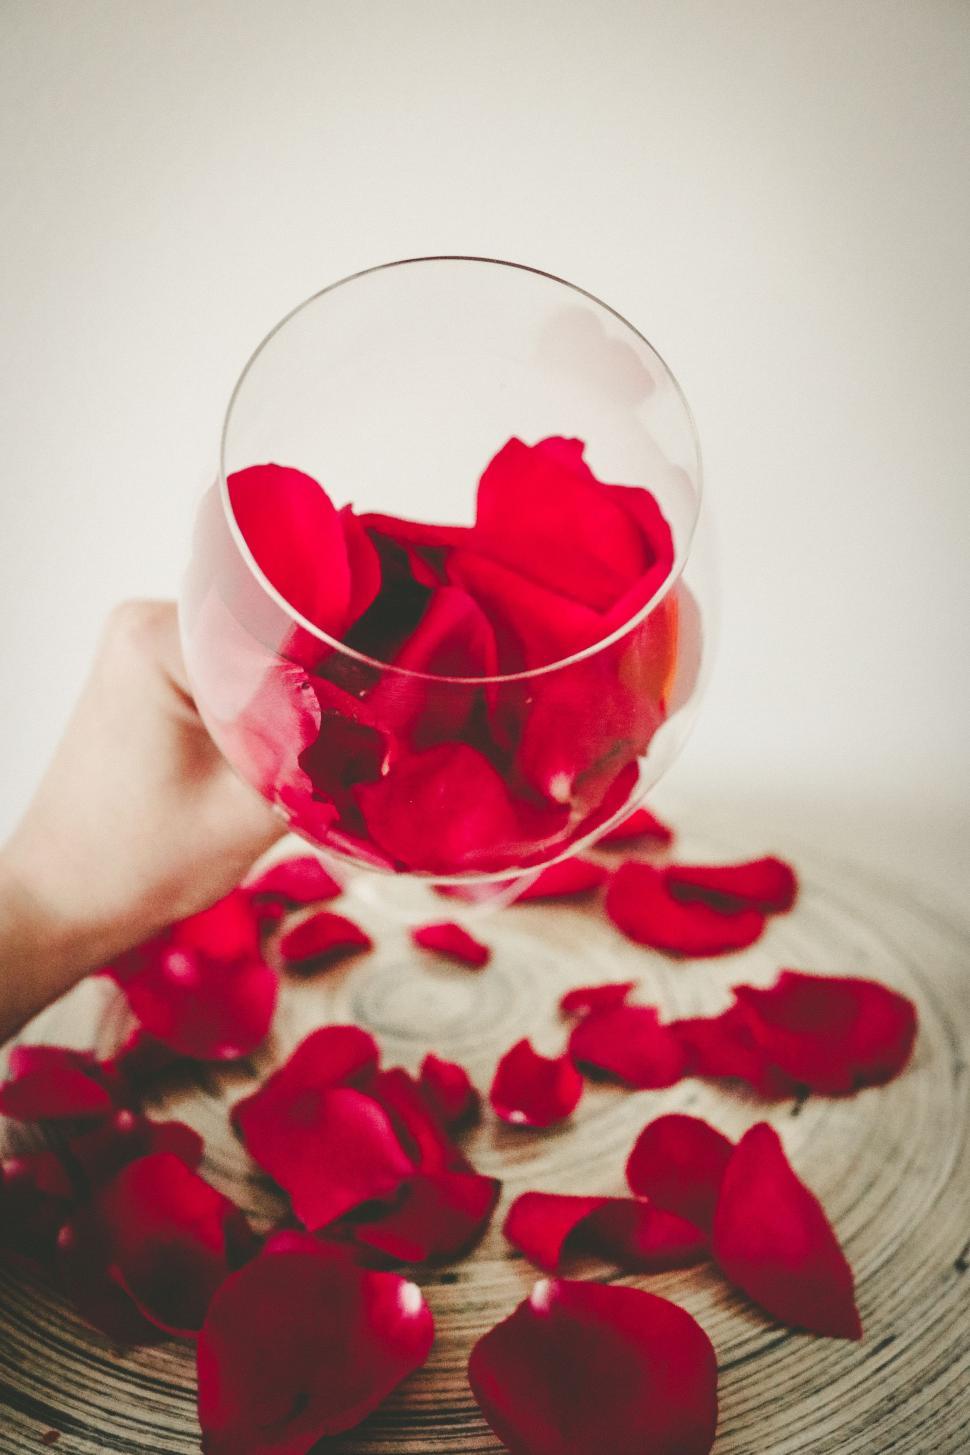 Free Image of Woman hand and rose petals with glass 